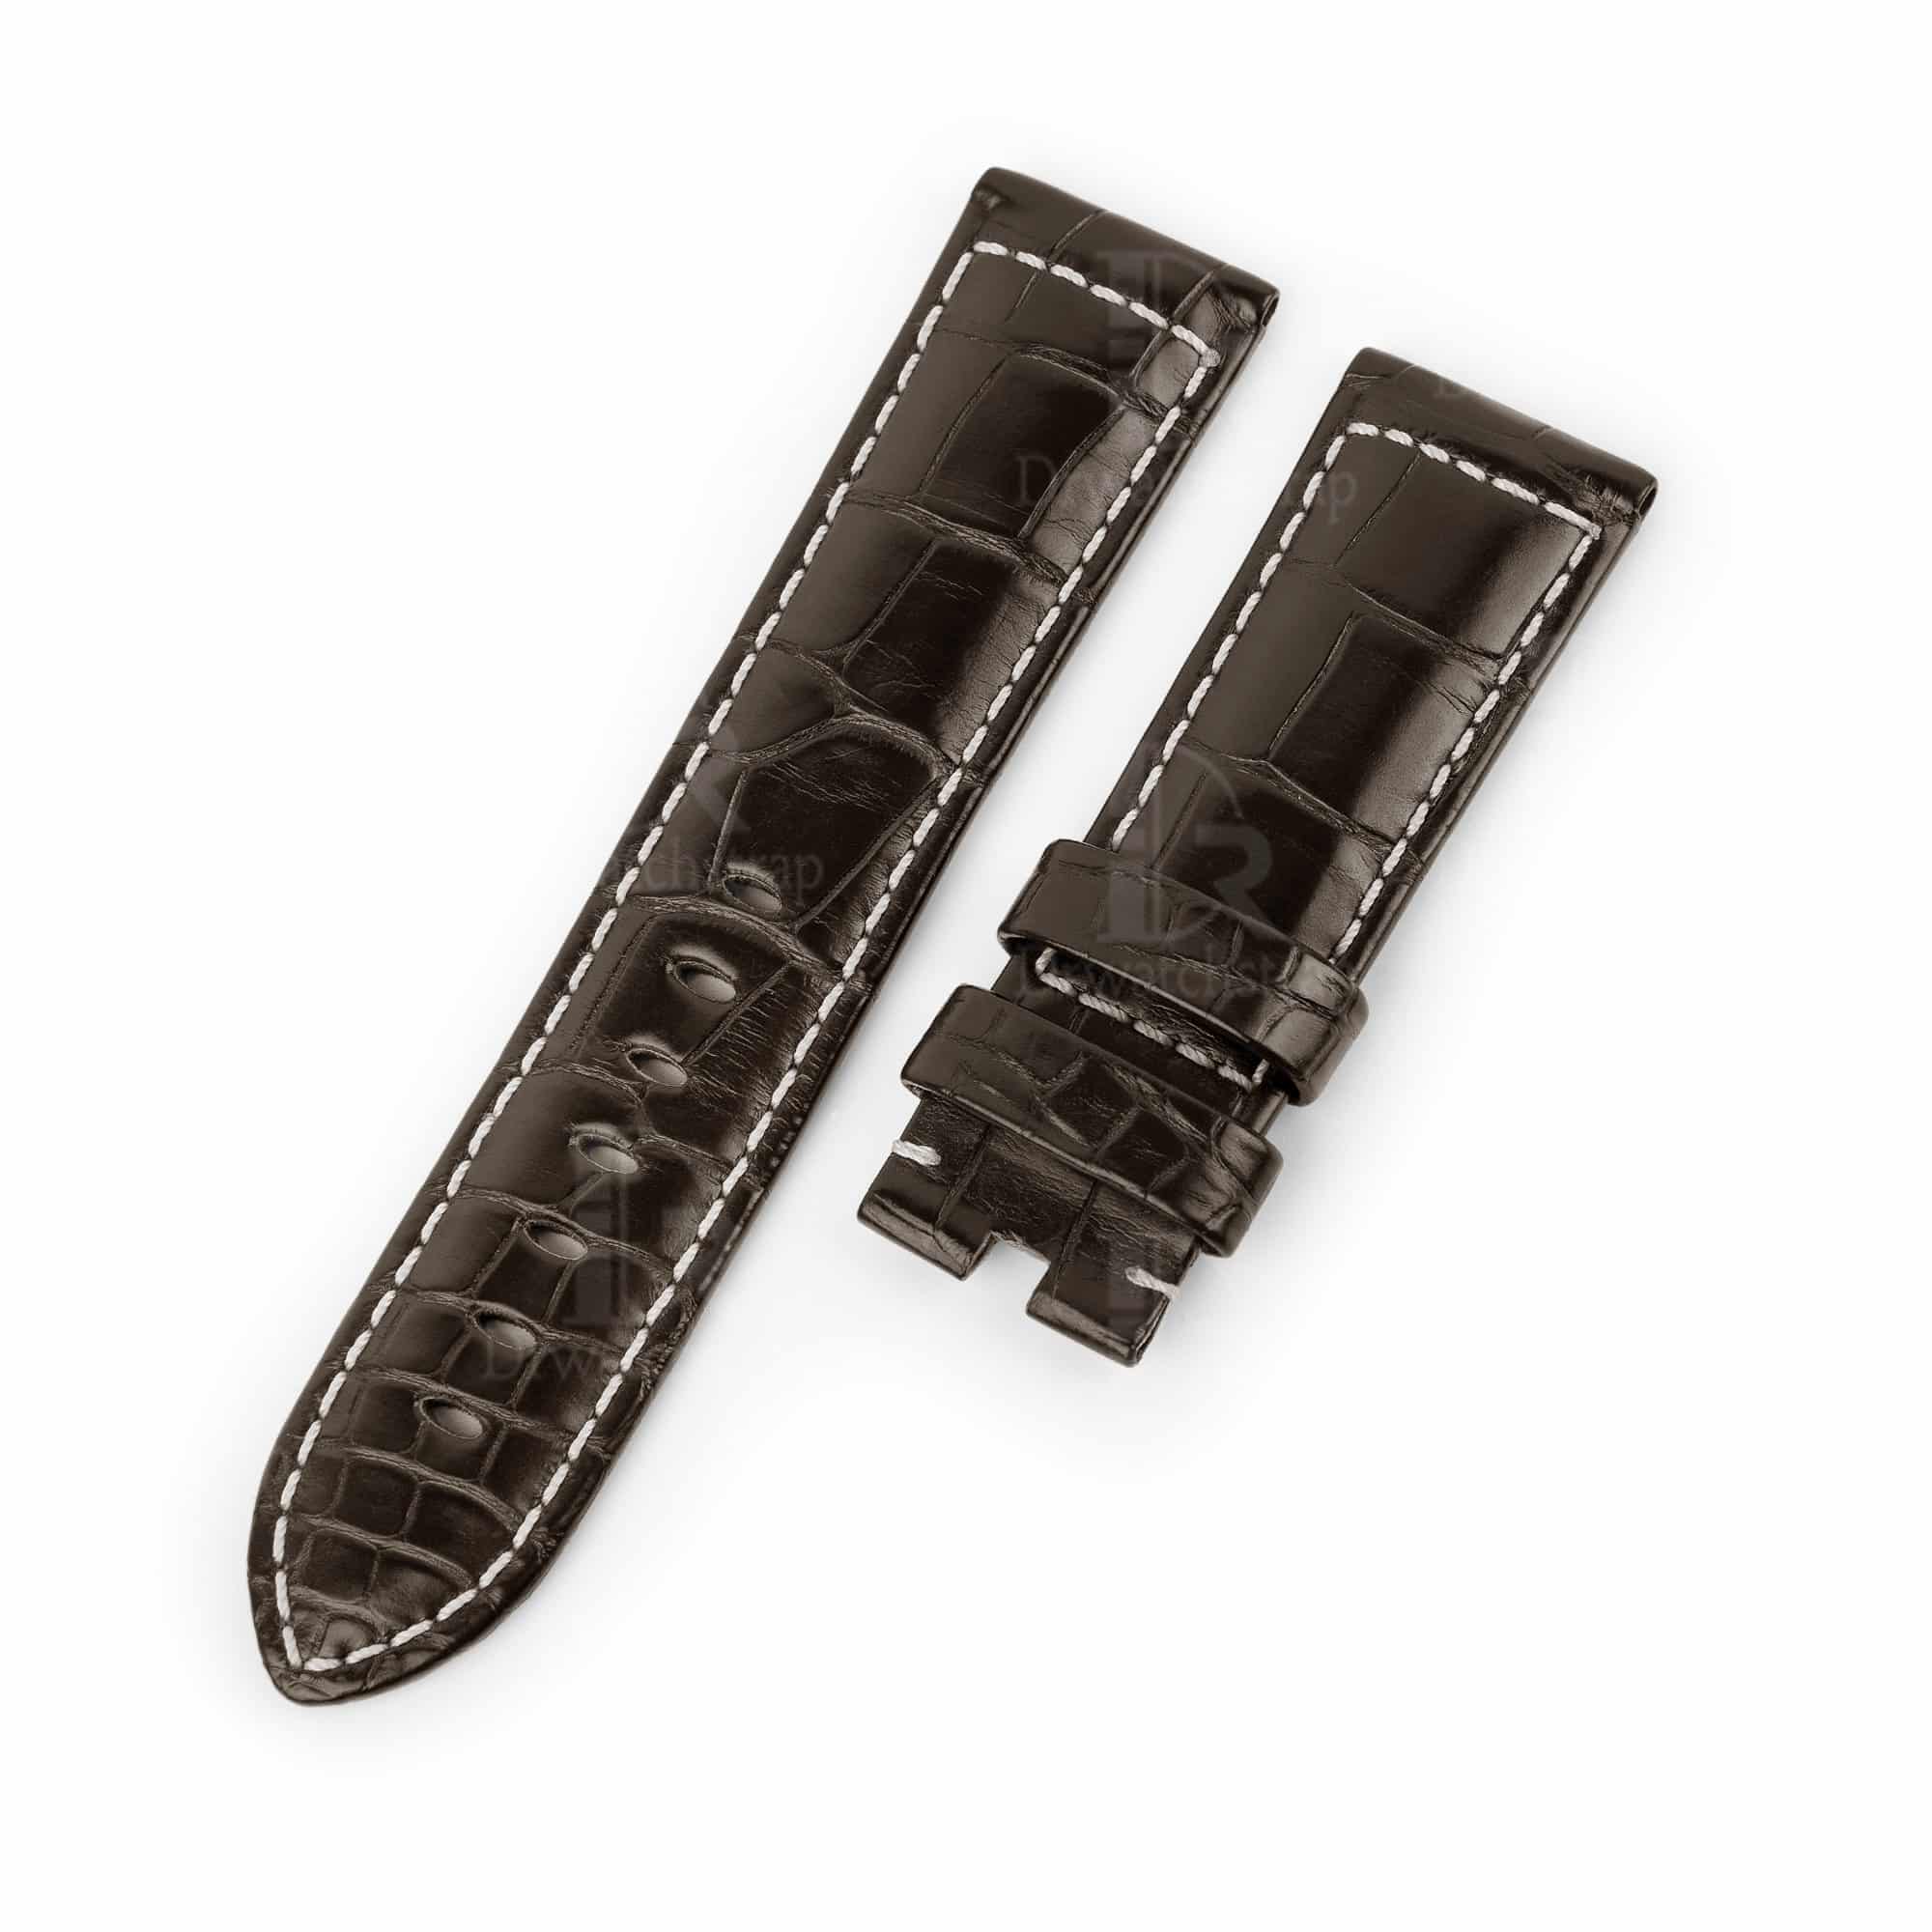 Genuine best quality OEM handmade custom Brown Panerai Alligator Strap and watch band replacement 22mm 24mm for Panerai Luminor Due luxury watches from dr watchstrap for sale - Shop the premium crocodile material leather straps and watchbands online at a low price